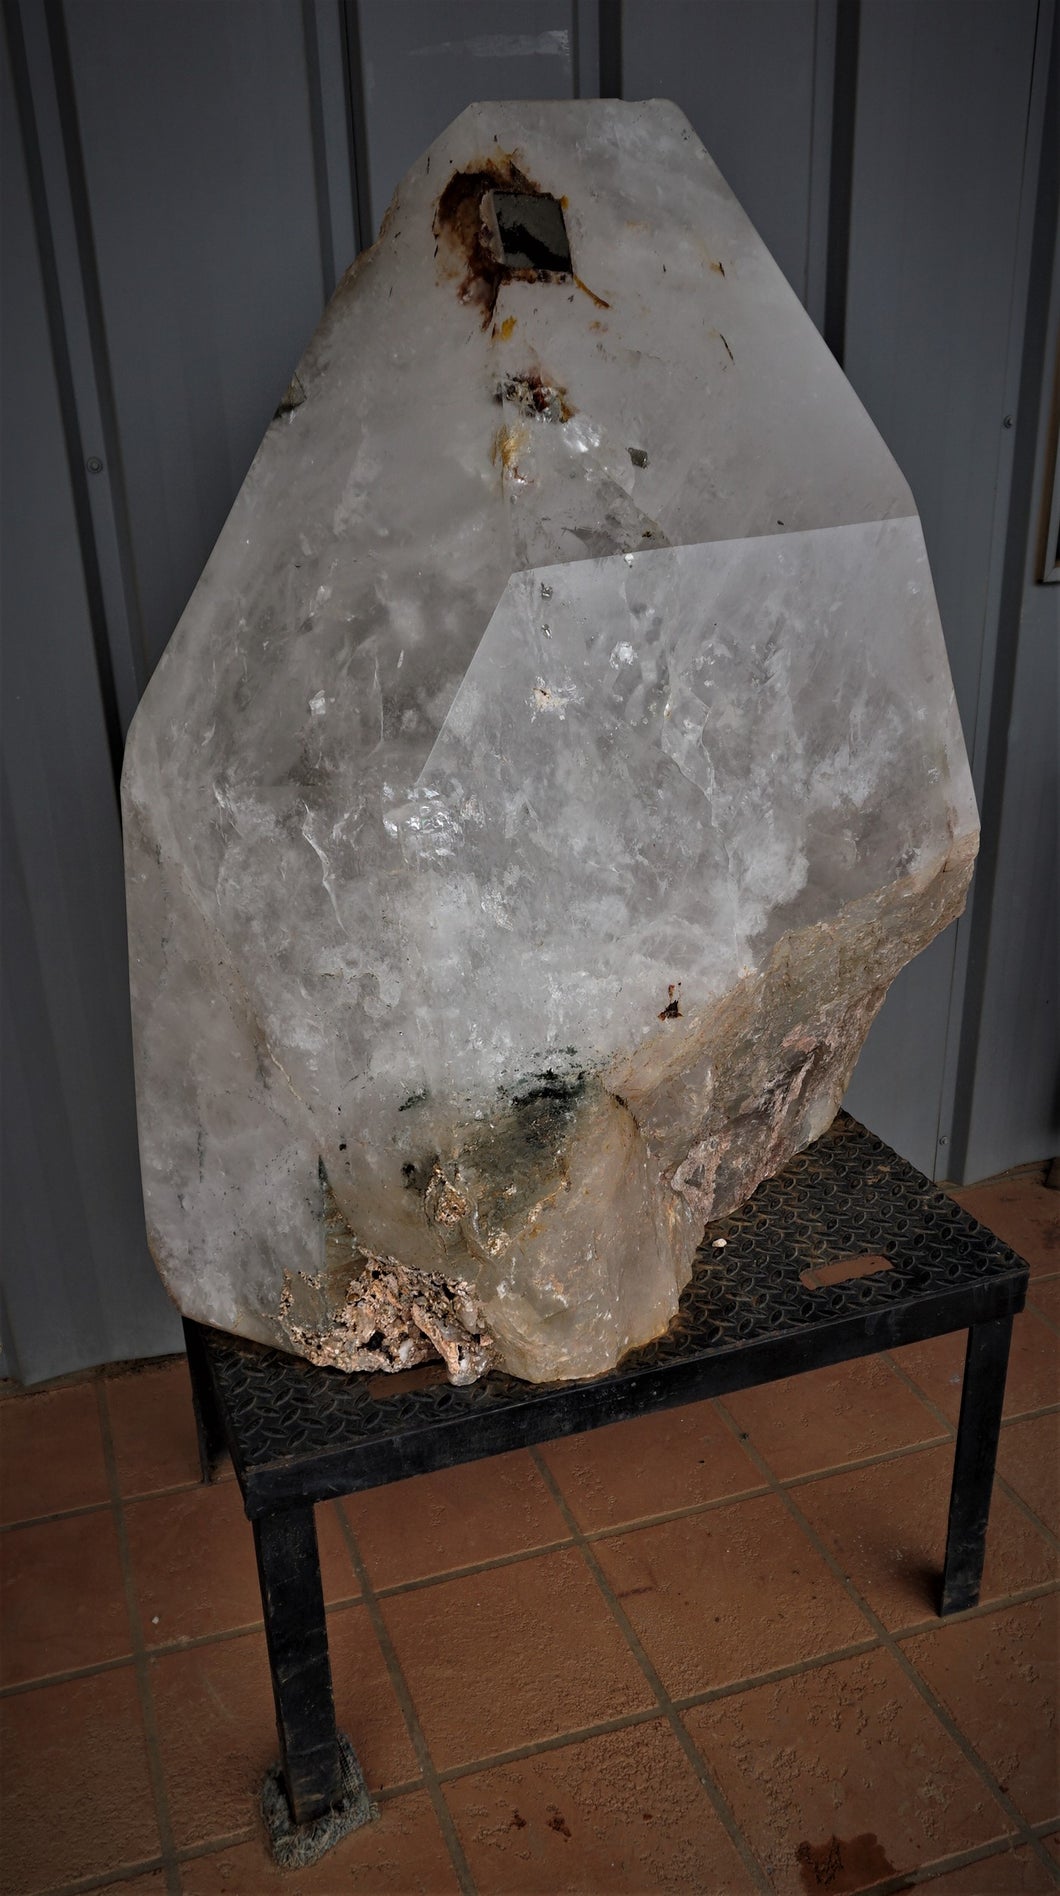 Massive Quartz Crystal  Point with pyrite growth plate